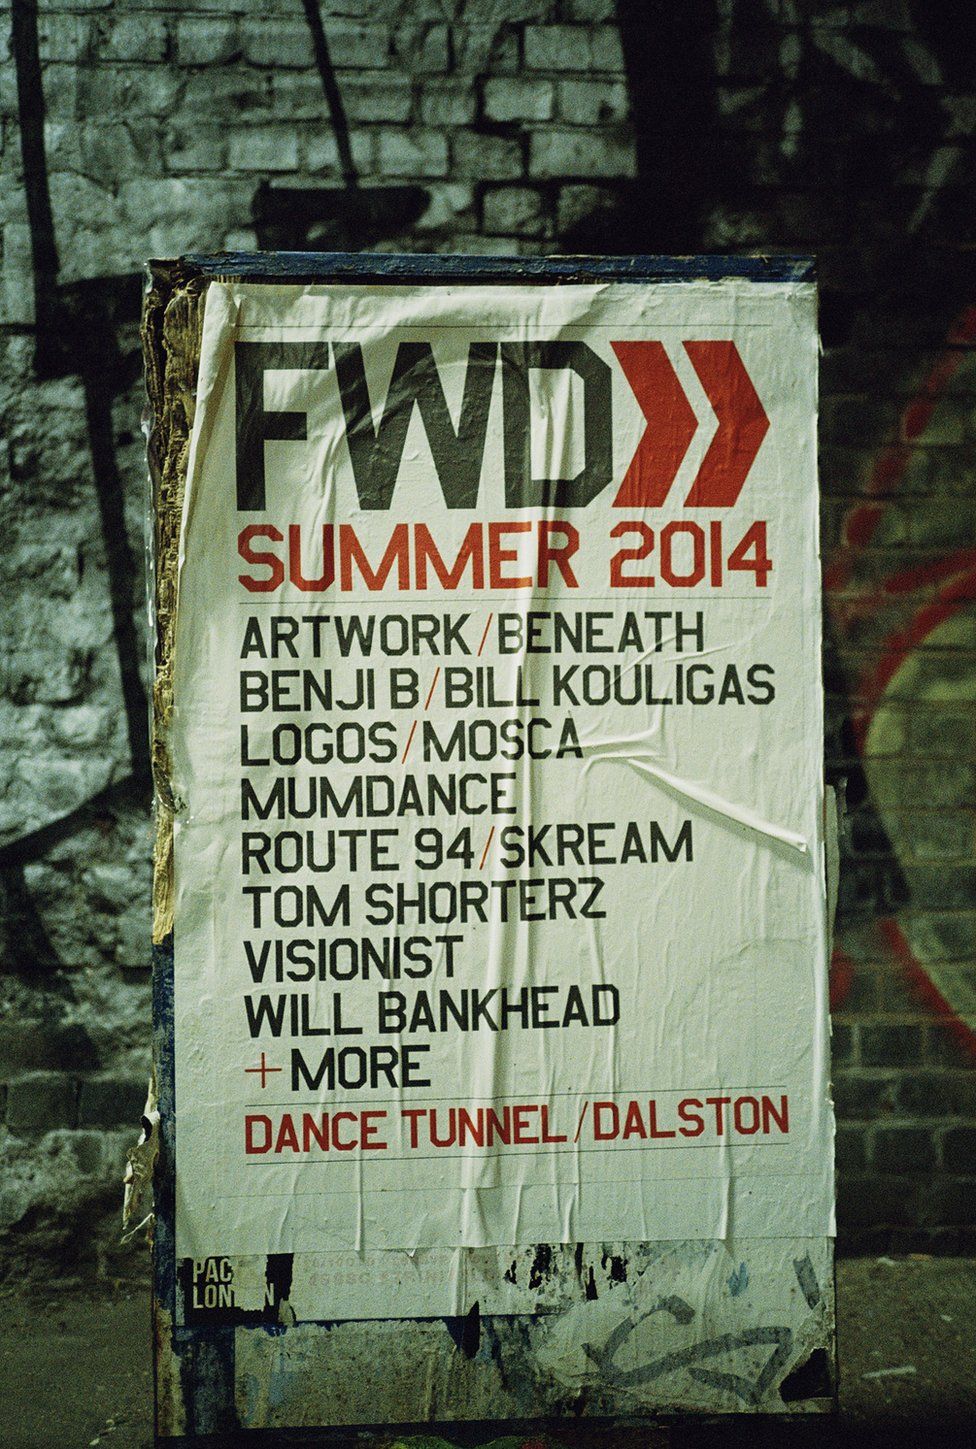 A poster for a night at Dalston's dance tunnel